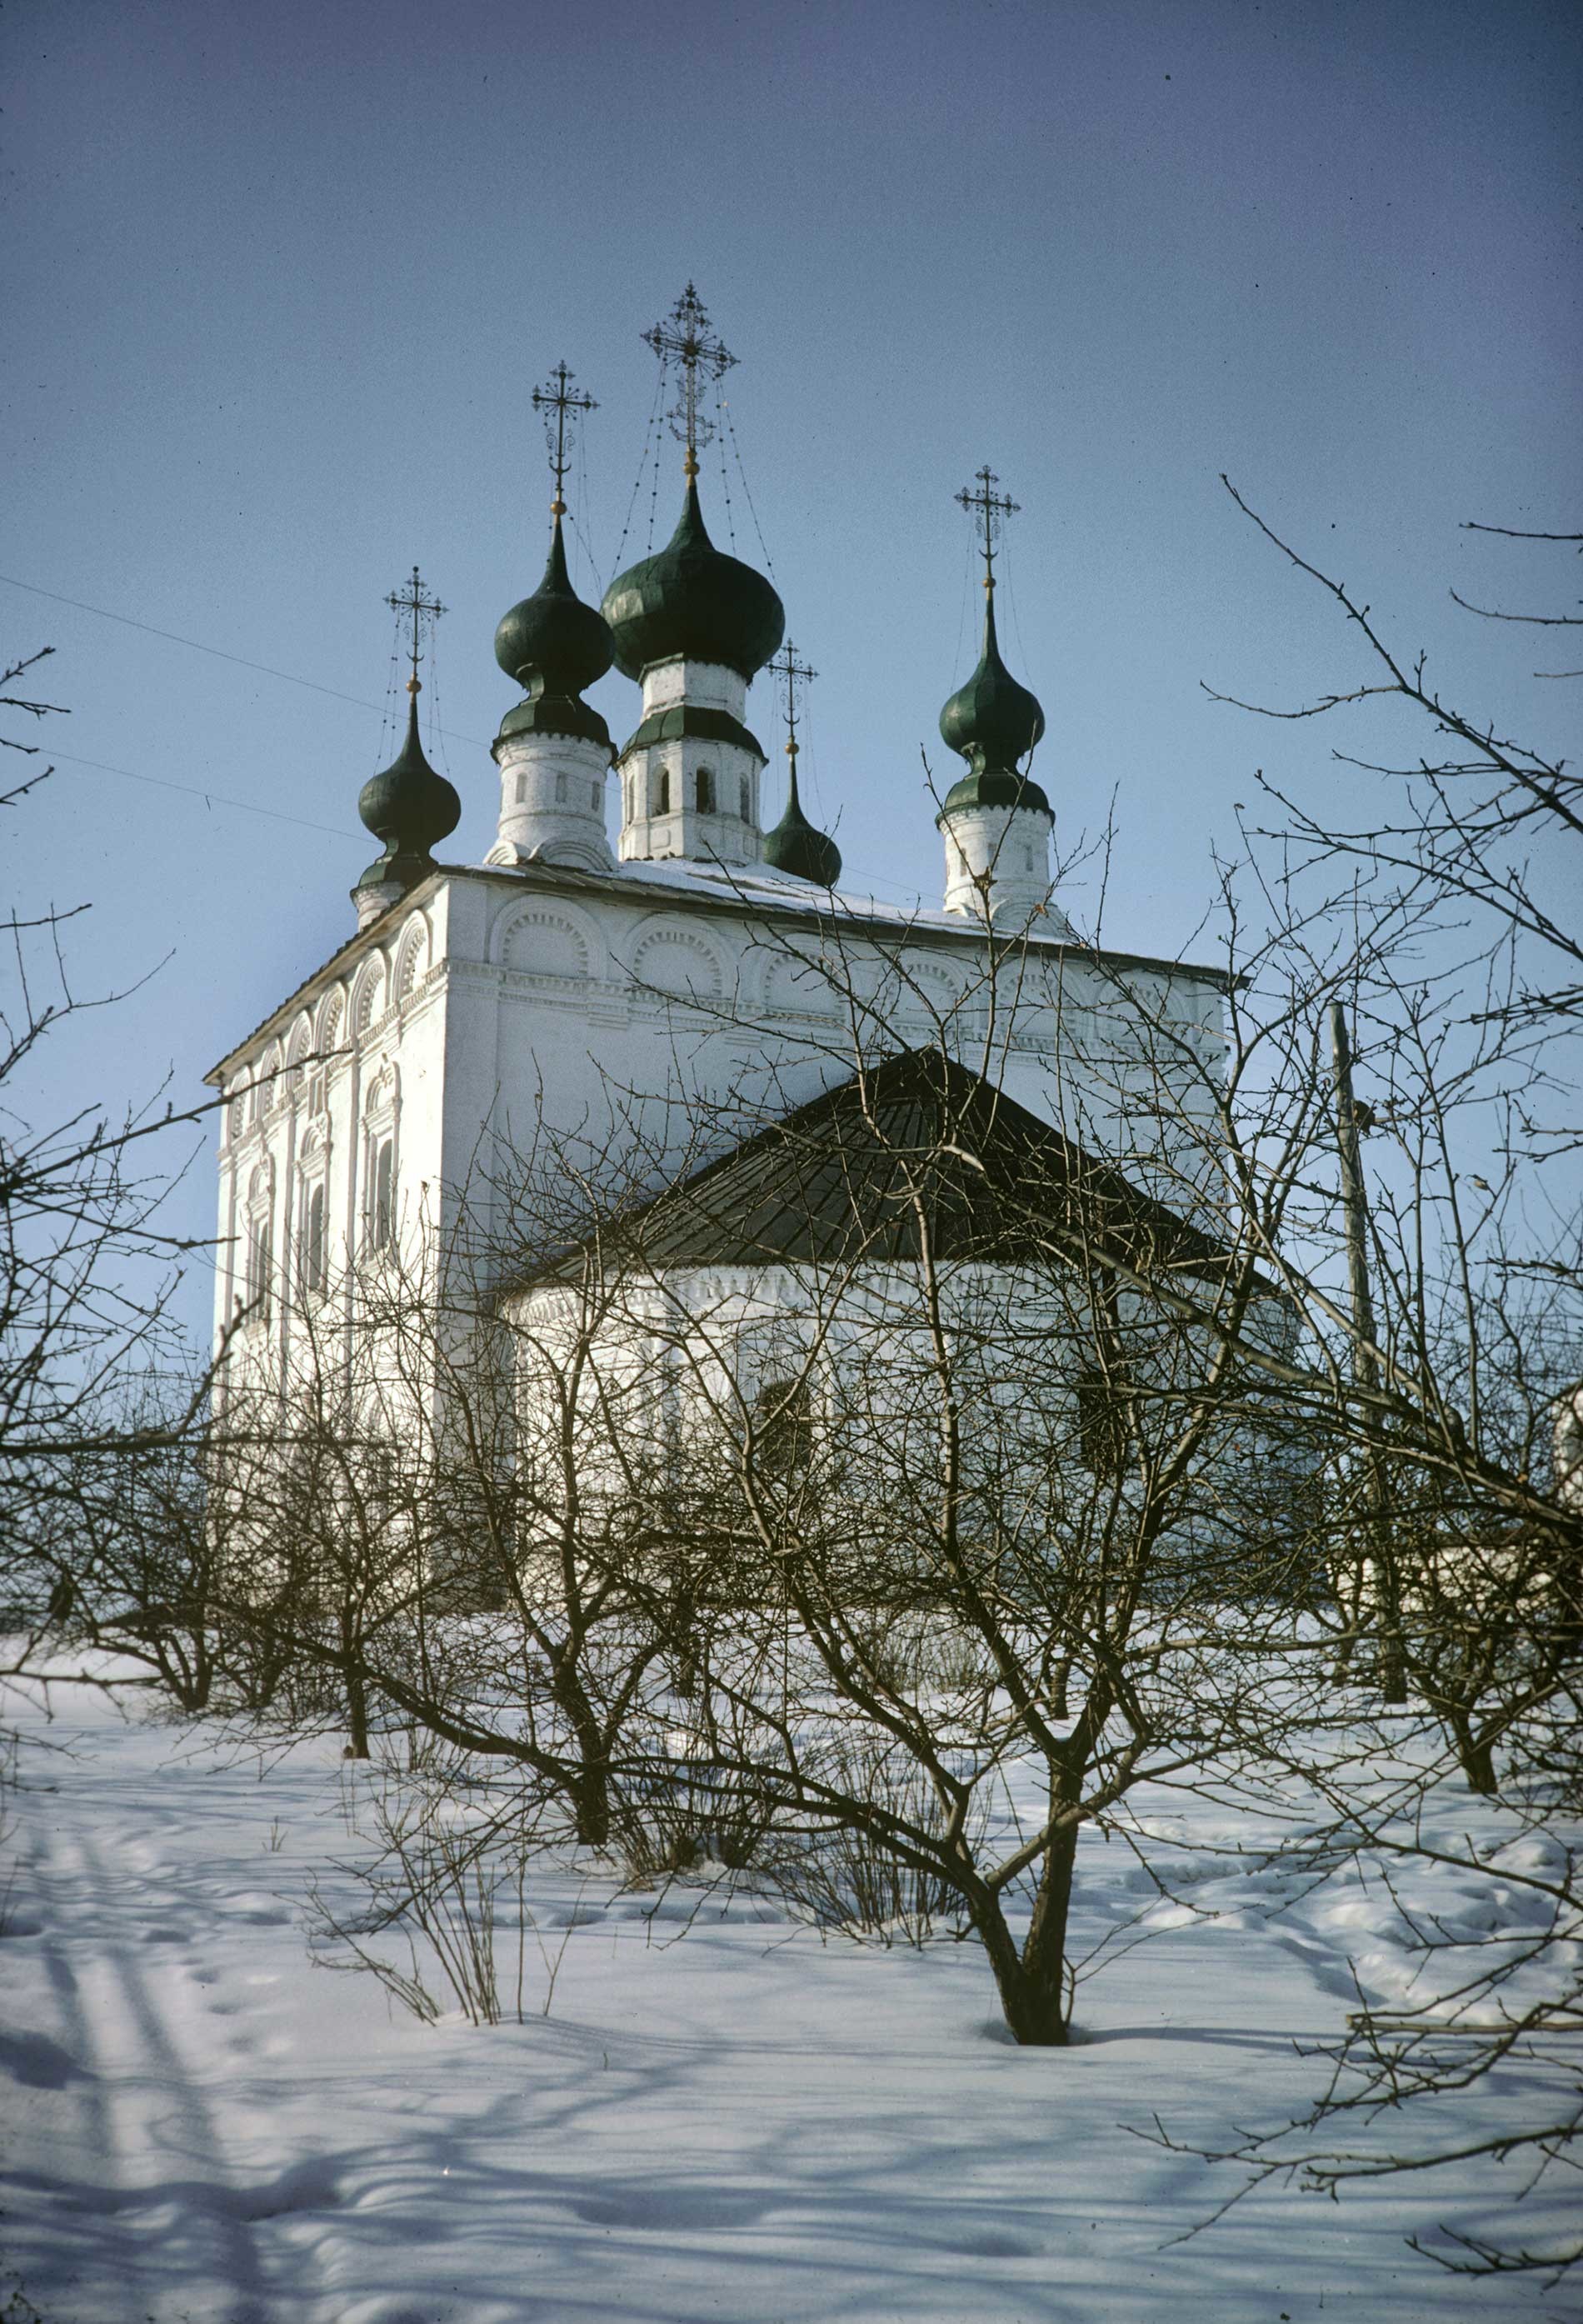 Suzdal. Church of Sts. Peter&Paul, southeast view. March 5, 1972.